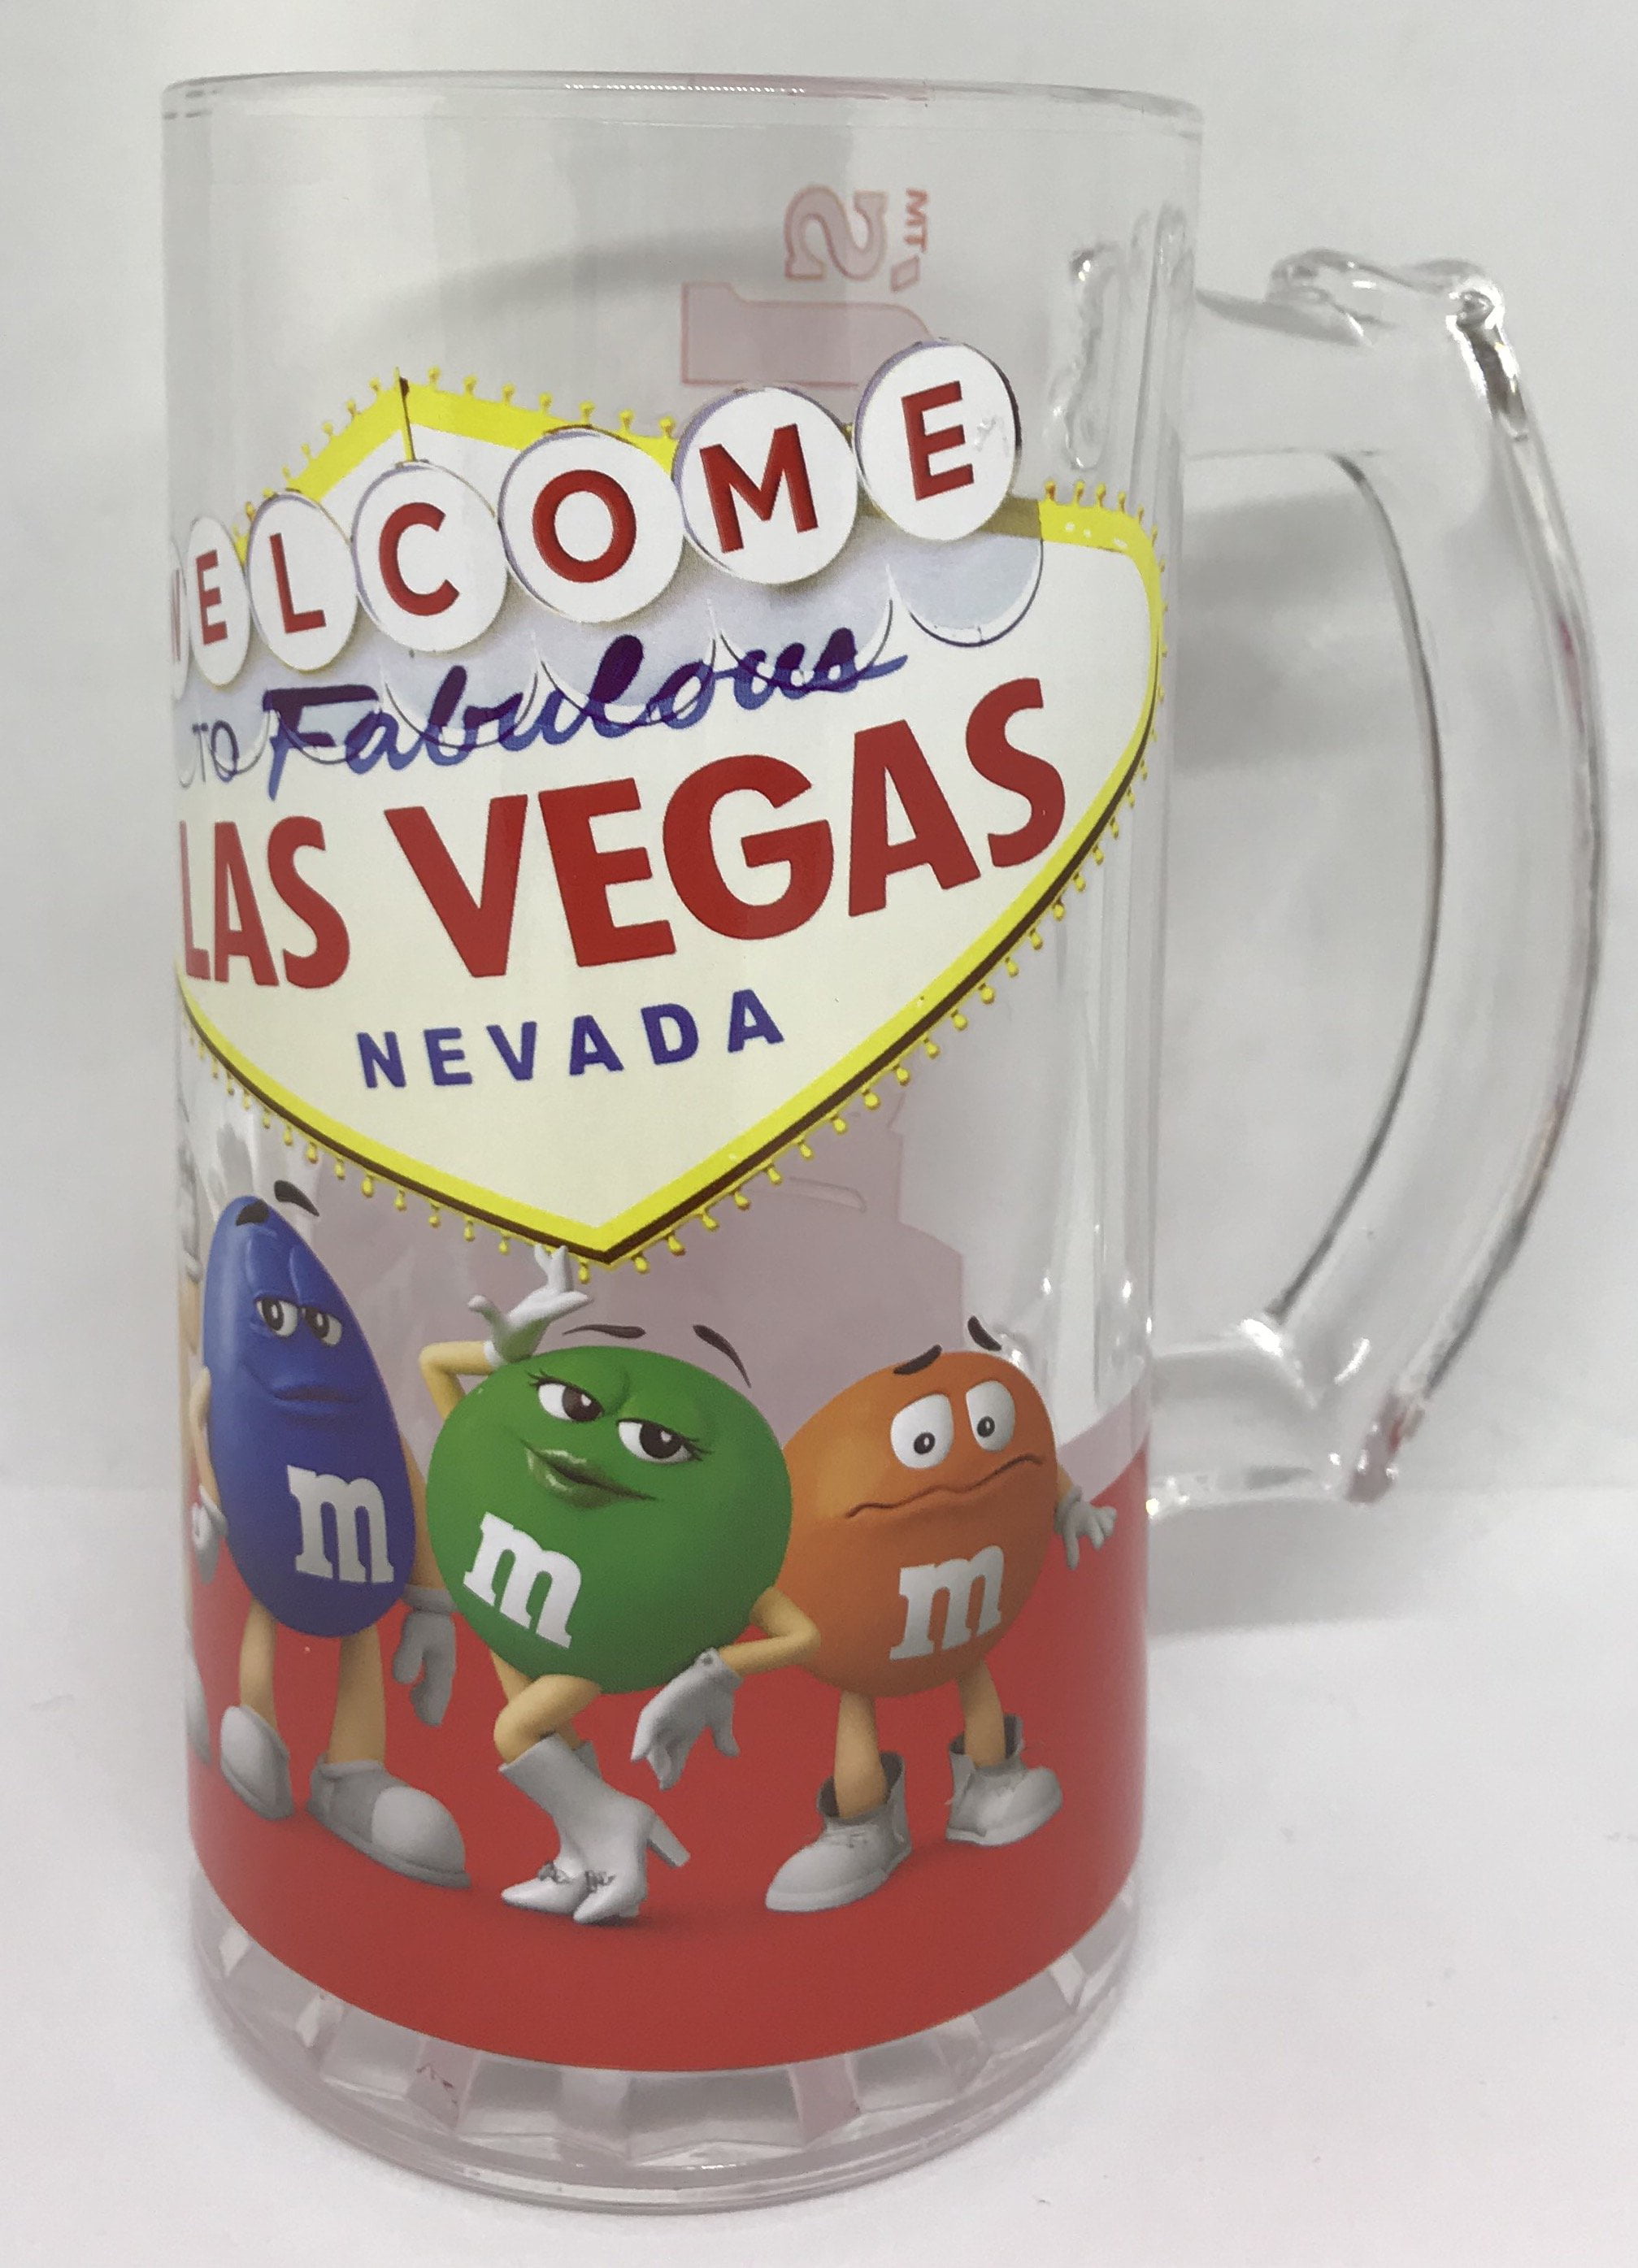 Ice Cold Beer & Beverages 14 oz just fill it up and freeze Double Wall Mug Freezer 4 PACK Welcome to Las Vegas Highest Quality 12 oz Freezer Mug with Freezing Gel Mug Gift Boxed